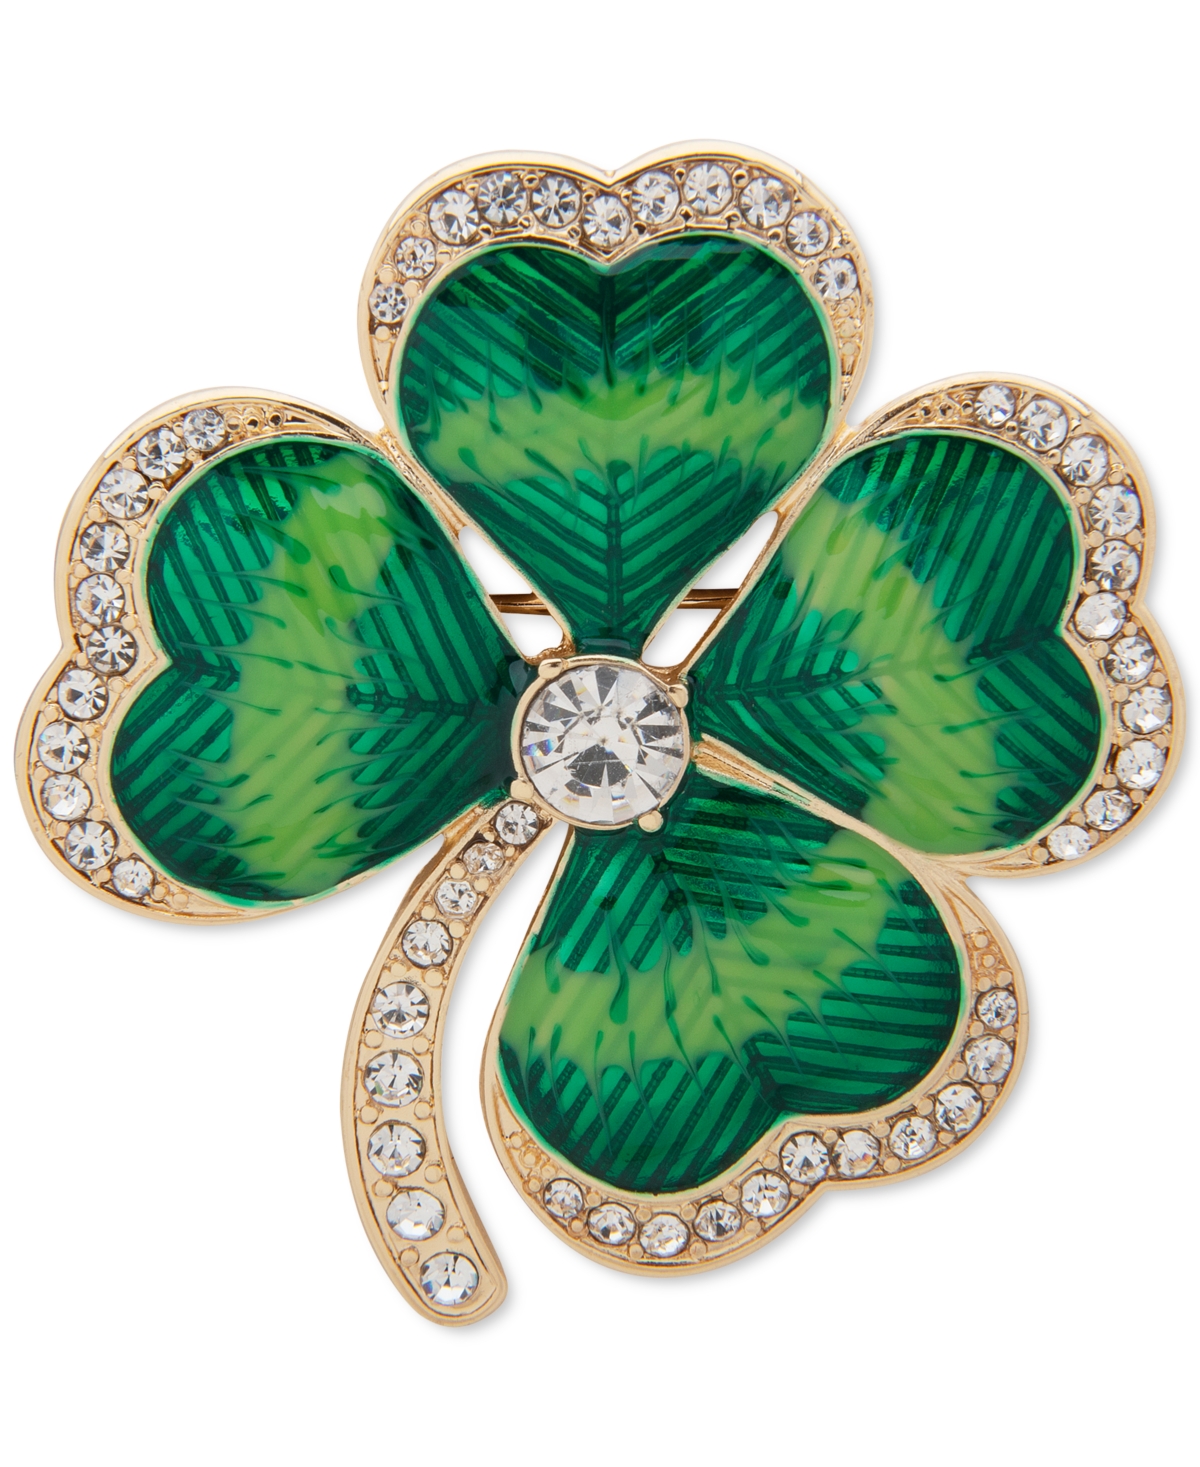 Gold-Tone Crystal 4-Leaf Clover Pin - Green